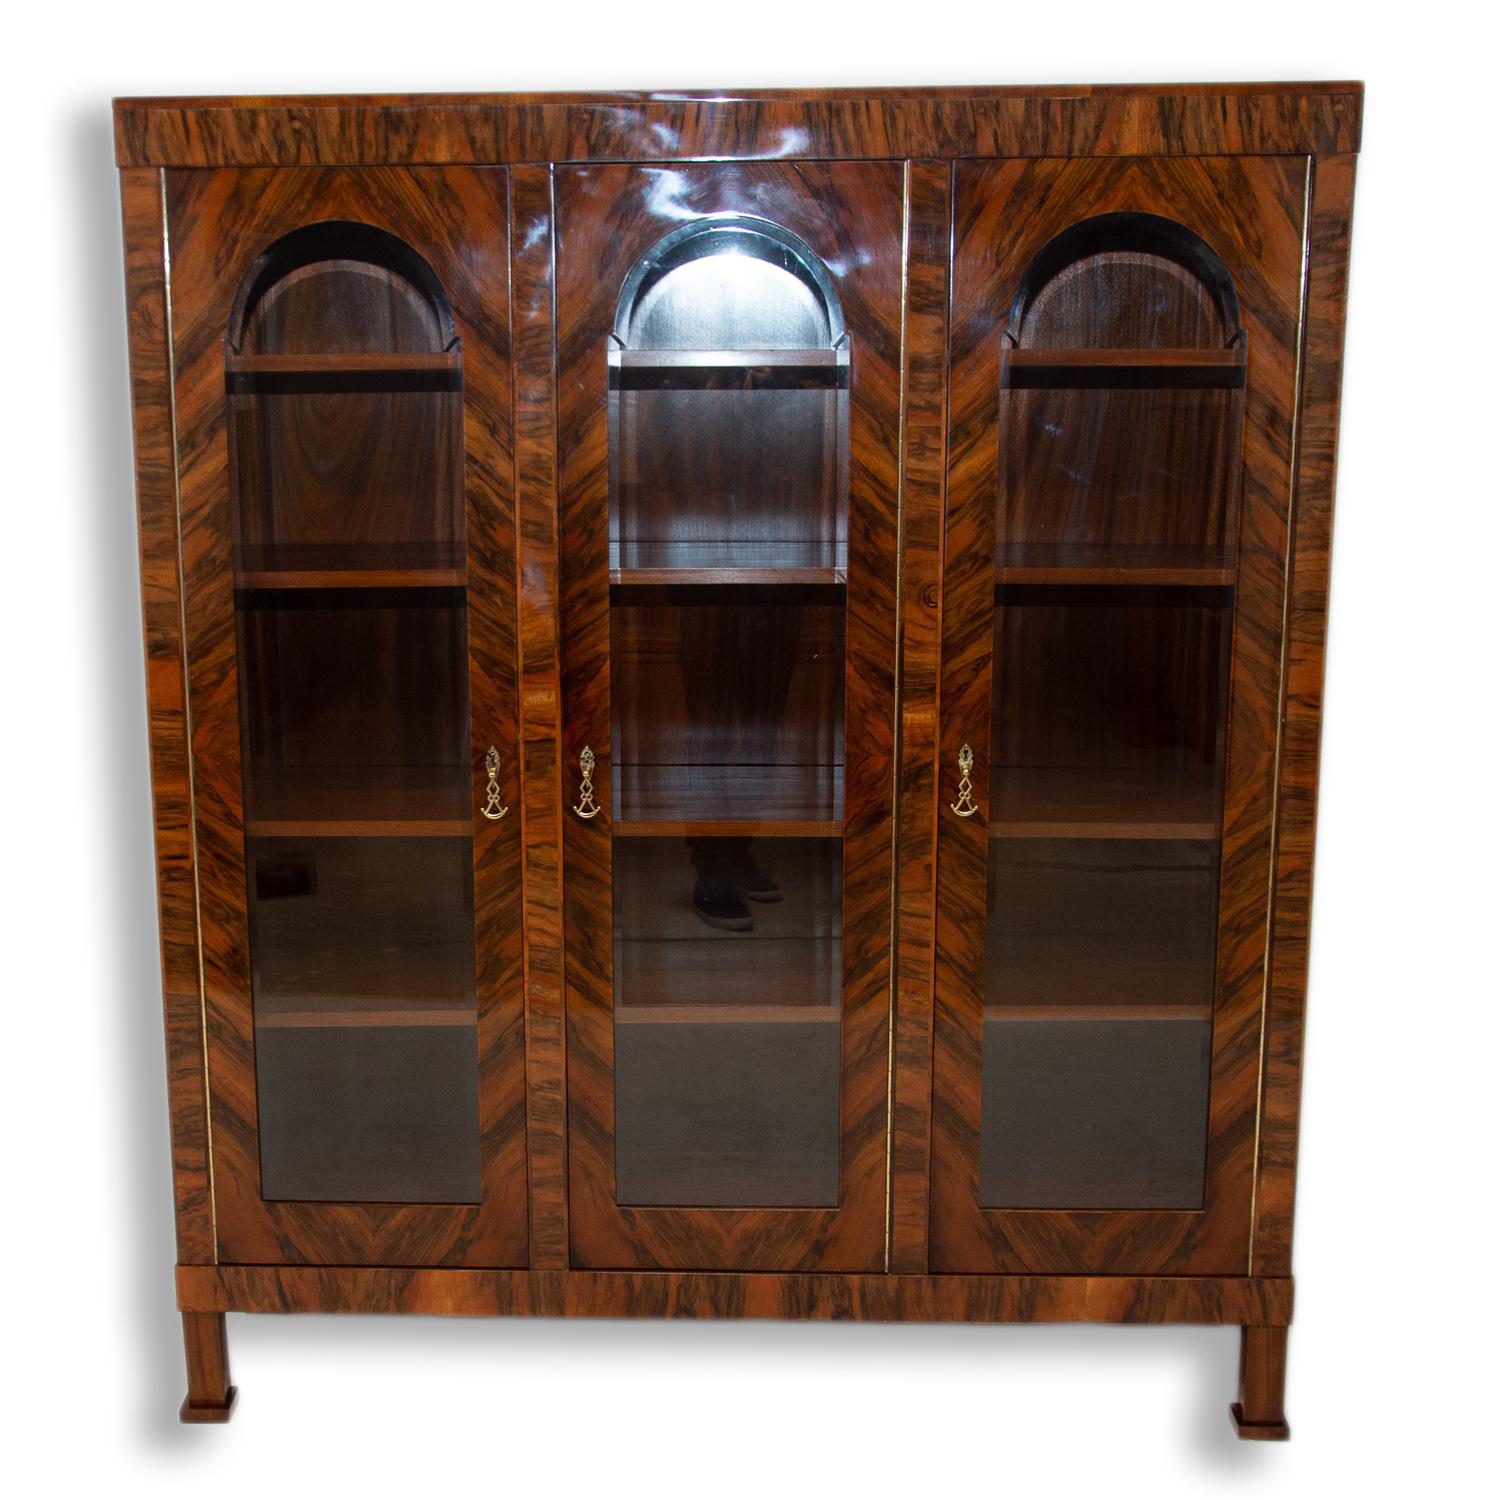 Art Deco library cabinet, made in the 1930´s in Bohemia. It features a regular shapes, a solid structure, and four massive legs on which the library stands. It´s made of walnut wood.
It´s fully renovated, newly varnished with polyurethane to a high